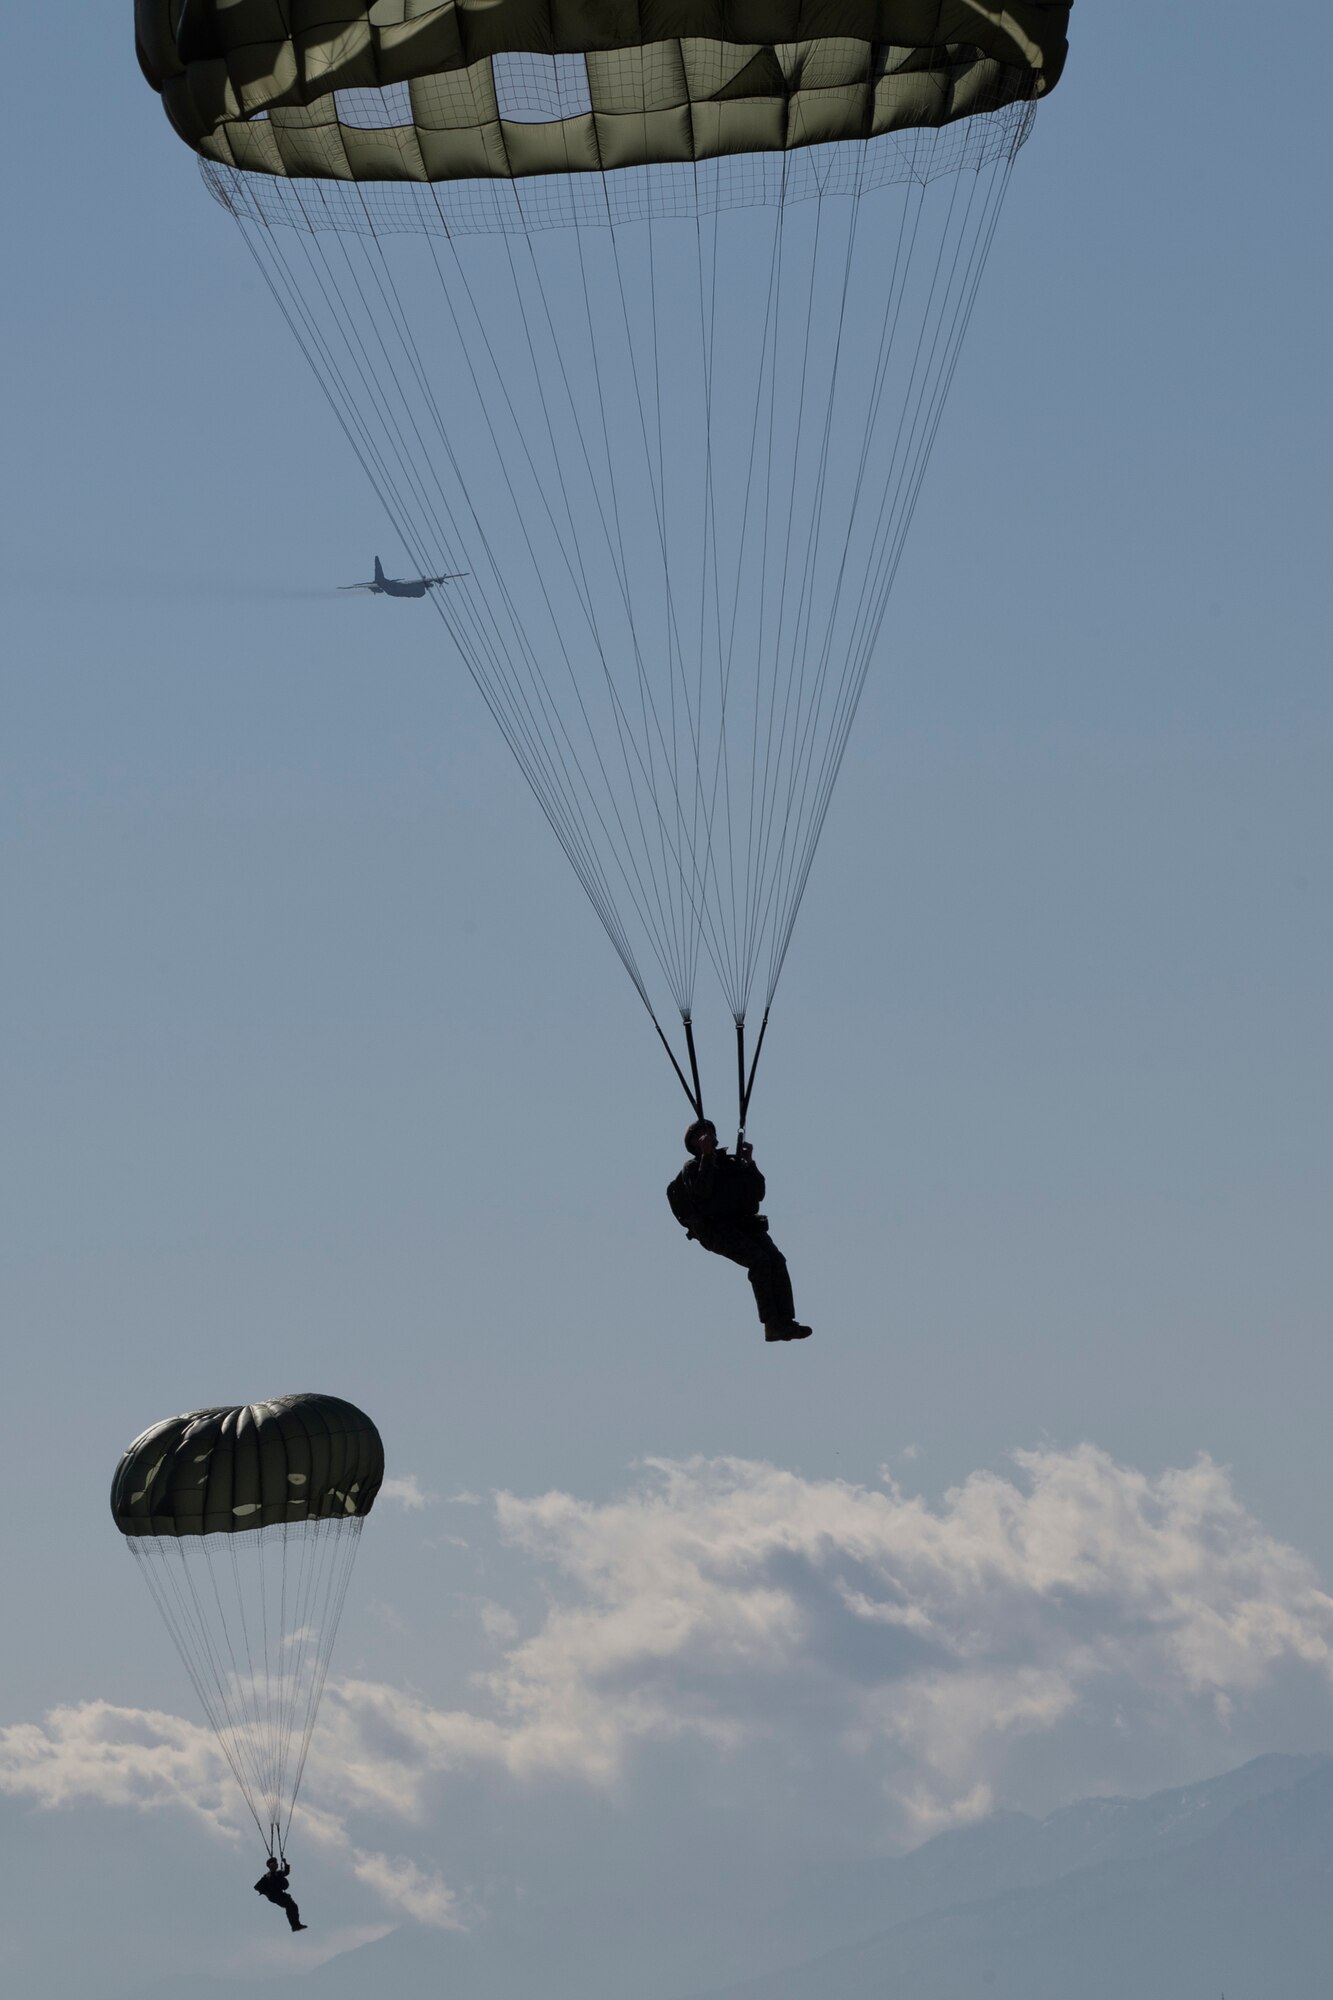 U.S. Marines from the 3rd Reconnaissance Battalion, 3rd Marine Division, III Marine Expeditionary Force drop from a U.S. Air Force C-130 Hercules, assigned to the 36th Airlift Squadron at Yokota Air Base, Japan, Jan. 10, 2017. The training not only allowed the Marines to practice jumping, but it also allowed the Yokota aircrews to practice flight tactics and timed-package drops. (U.S. Air Force photo by Yasuo Osakabe/Released) 